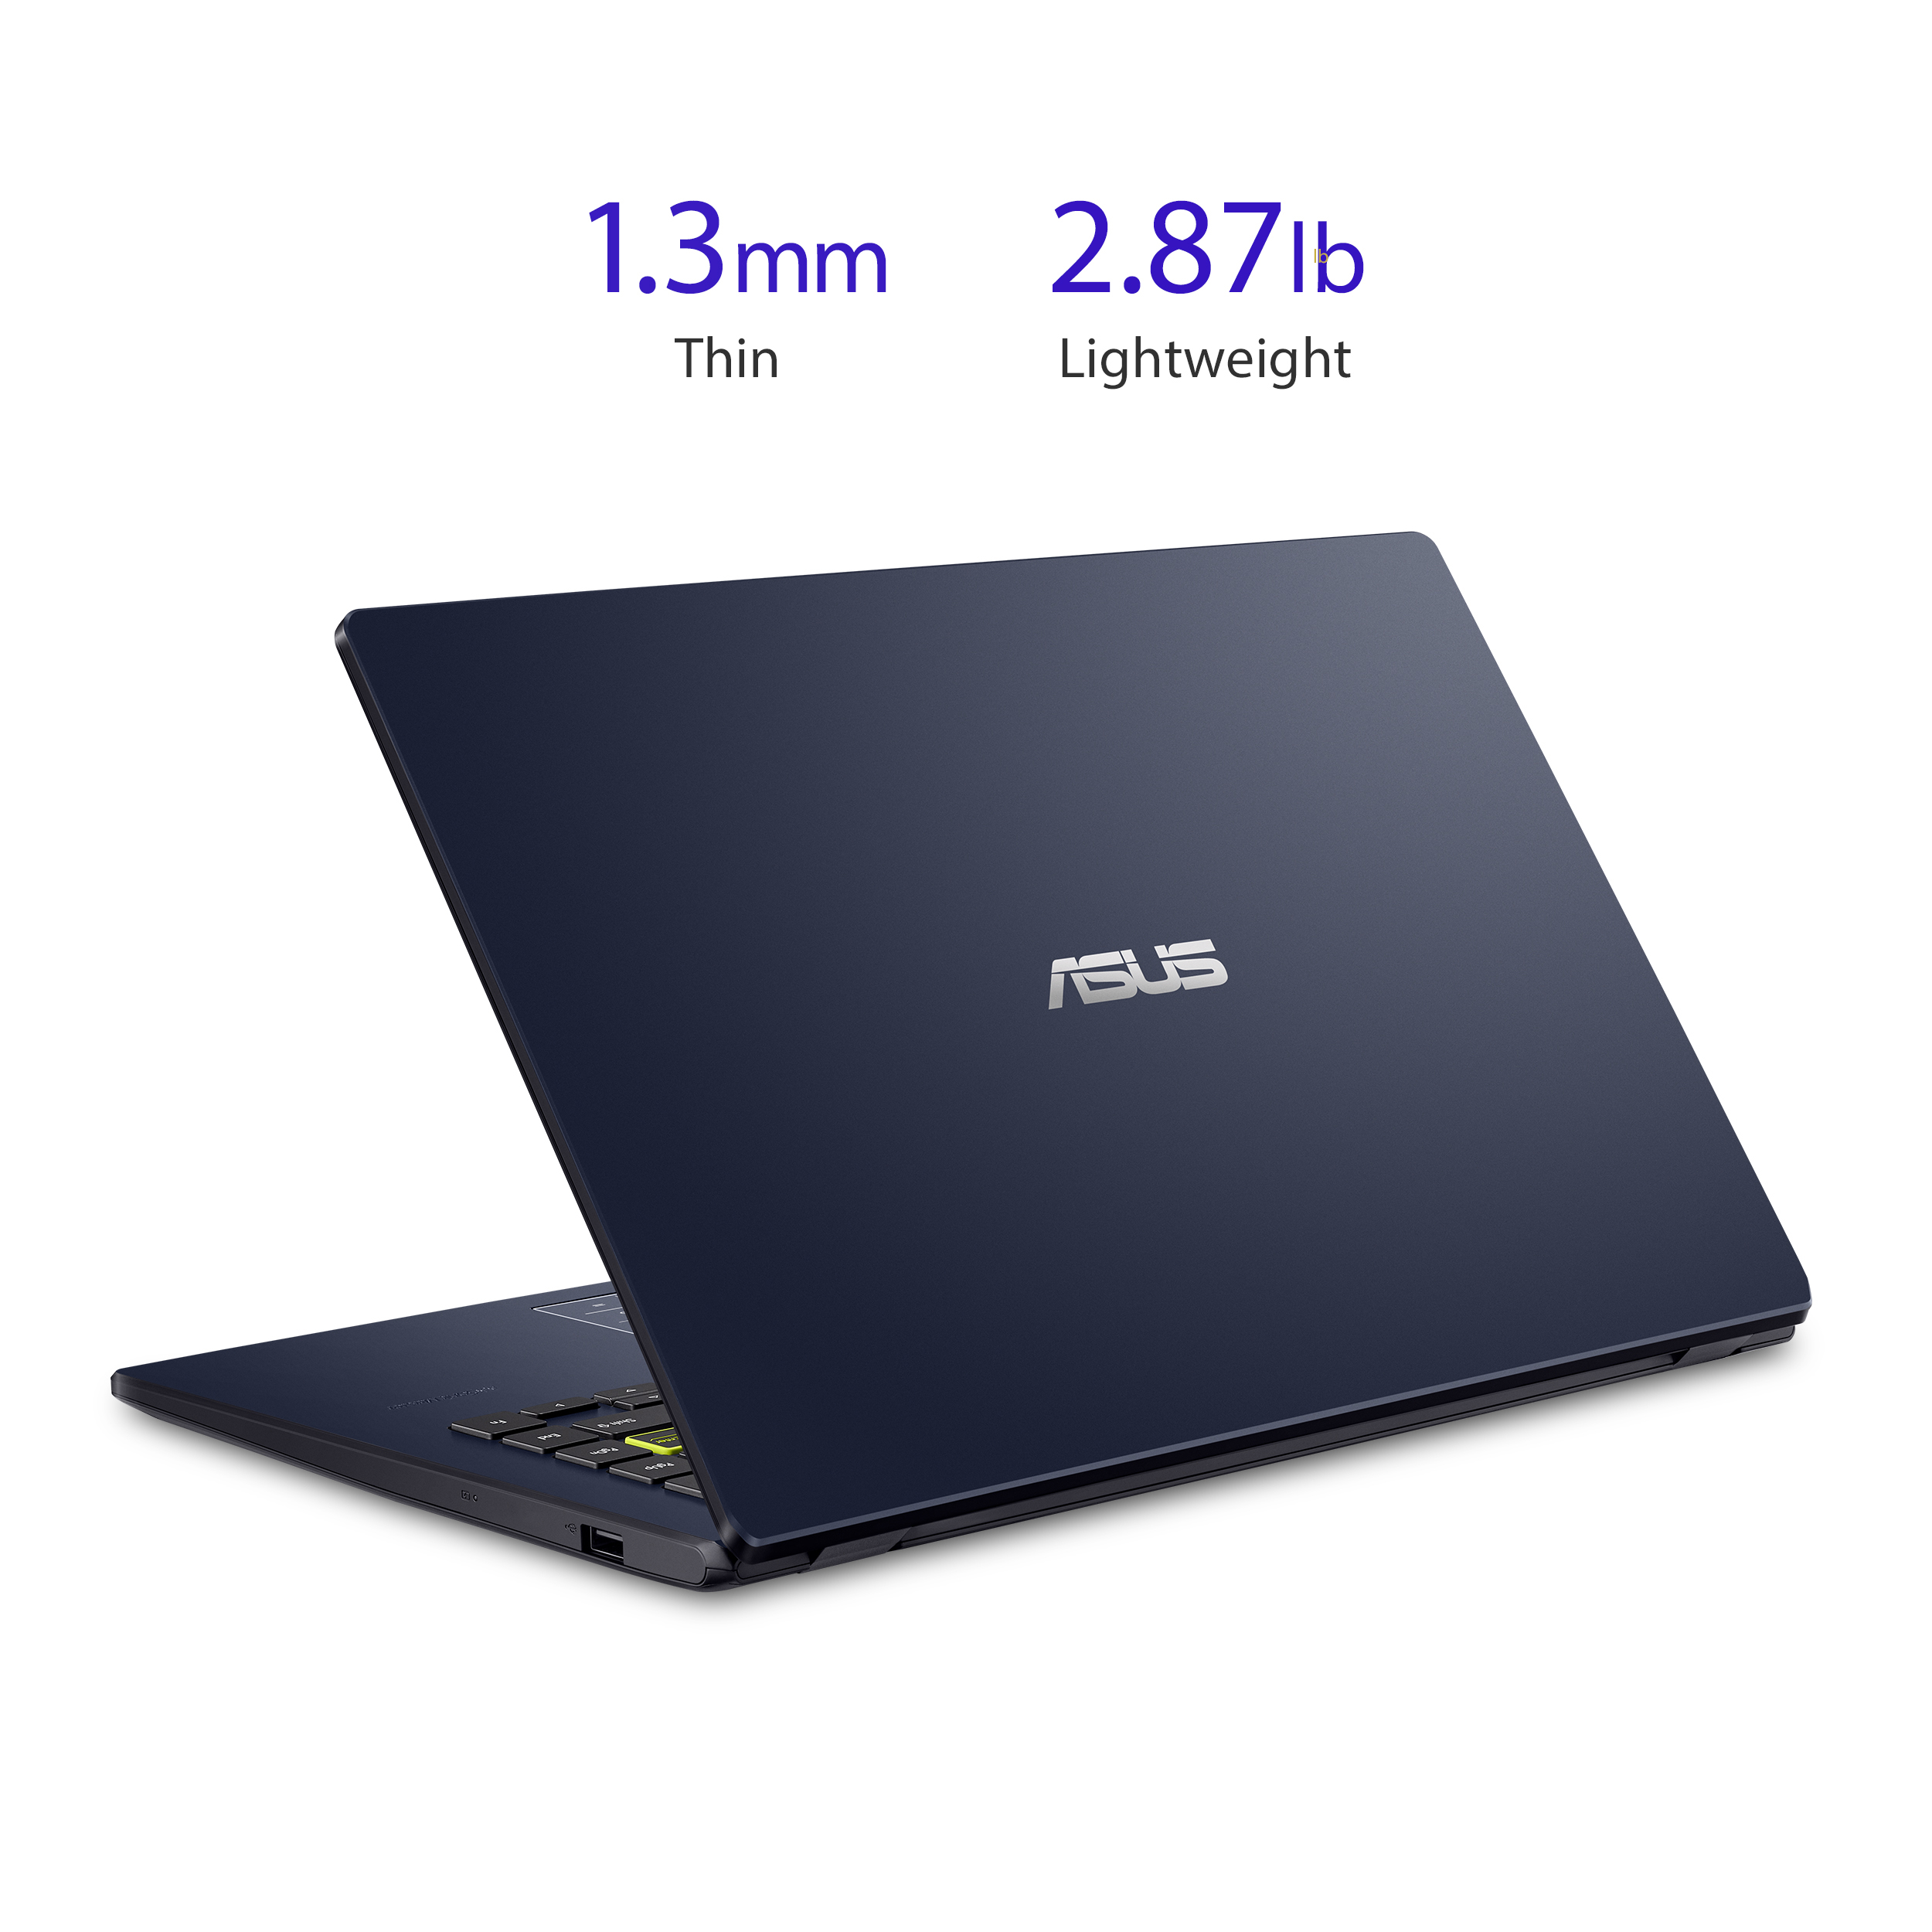 ASUS 14" 1080p PC Laptops, Intel Celeron N4020, 4GB RAM, 128GB SSD, Windows 11 Home in S mode, Star Black, L410MA-DS04 - image 3 of 5